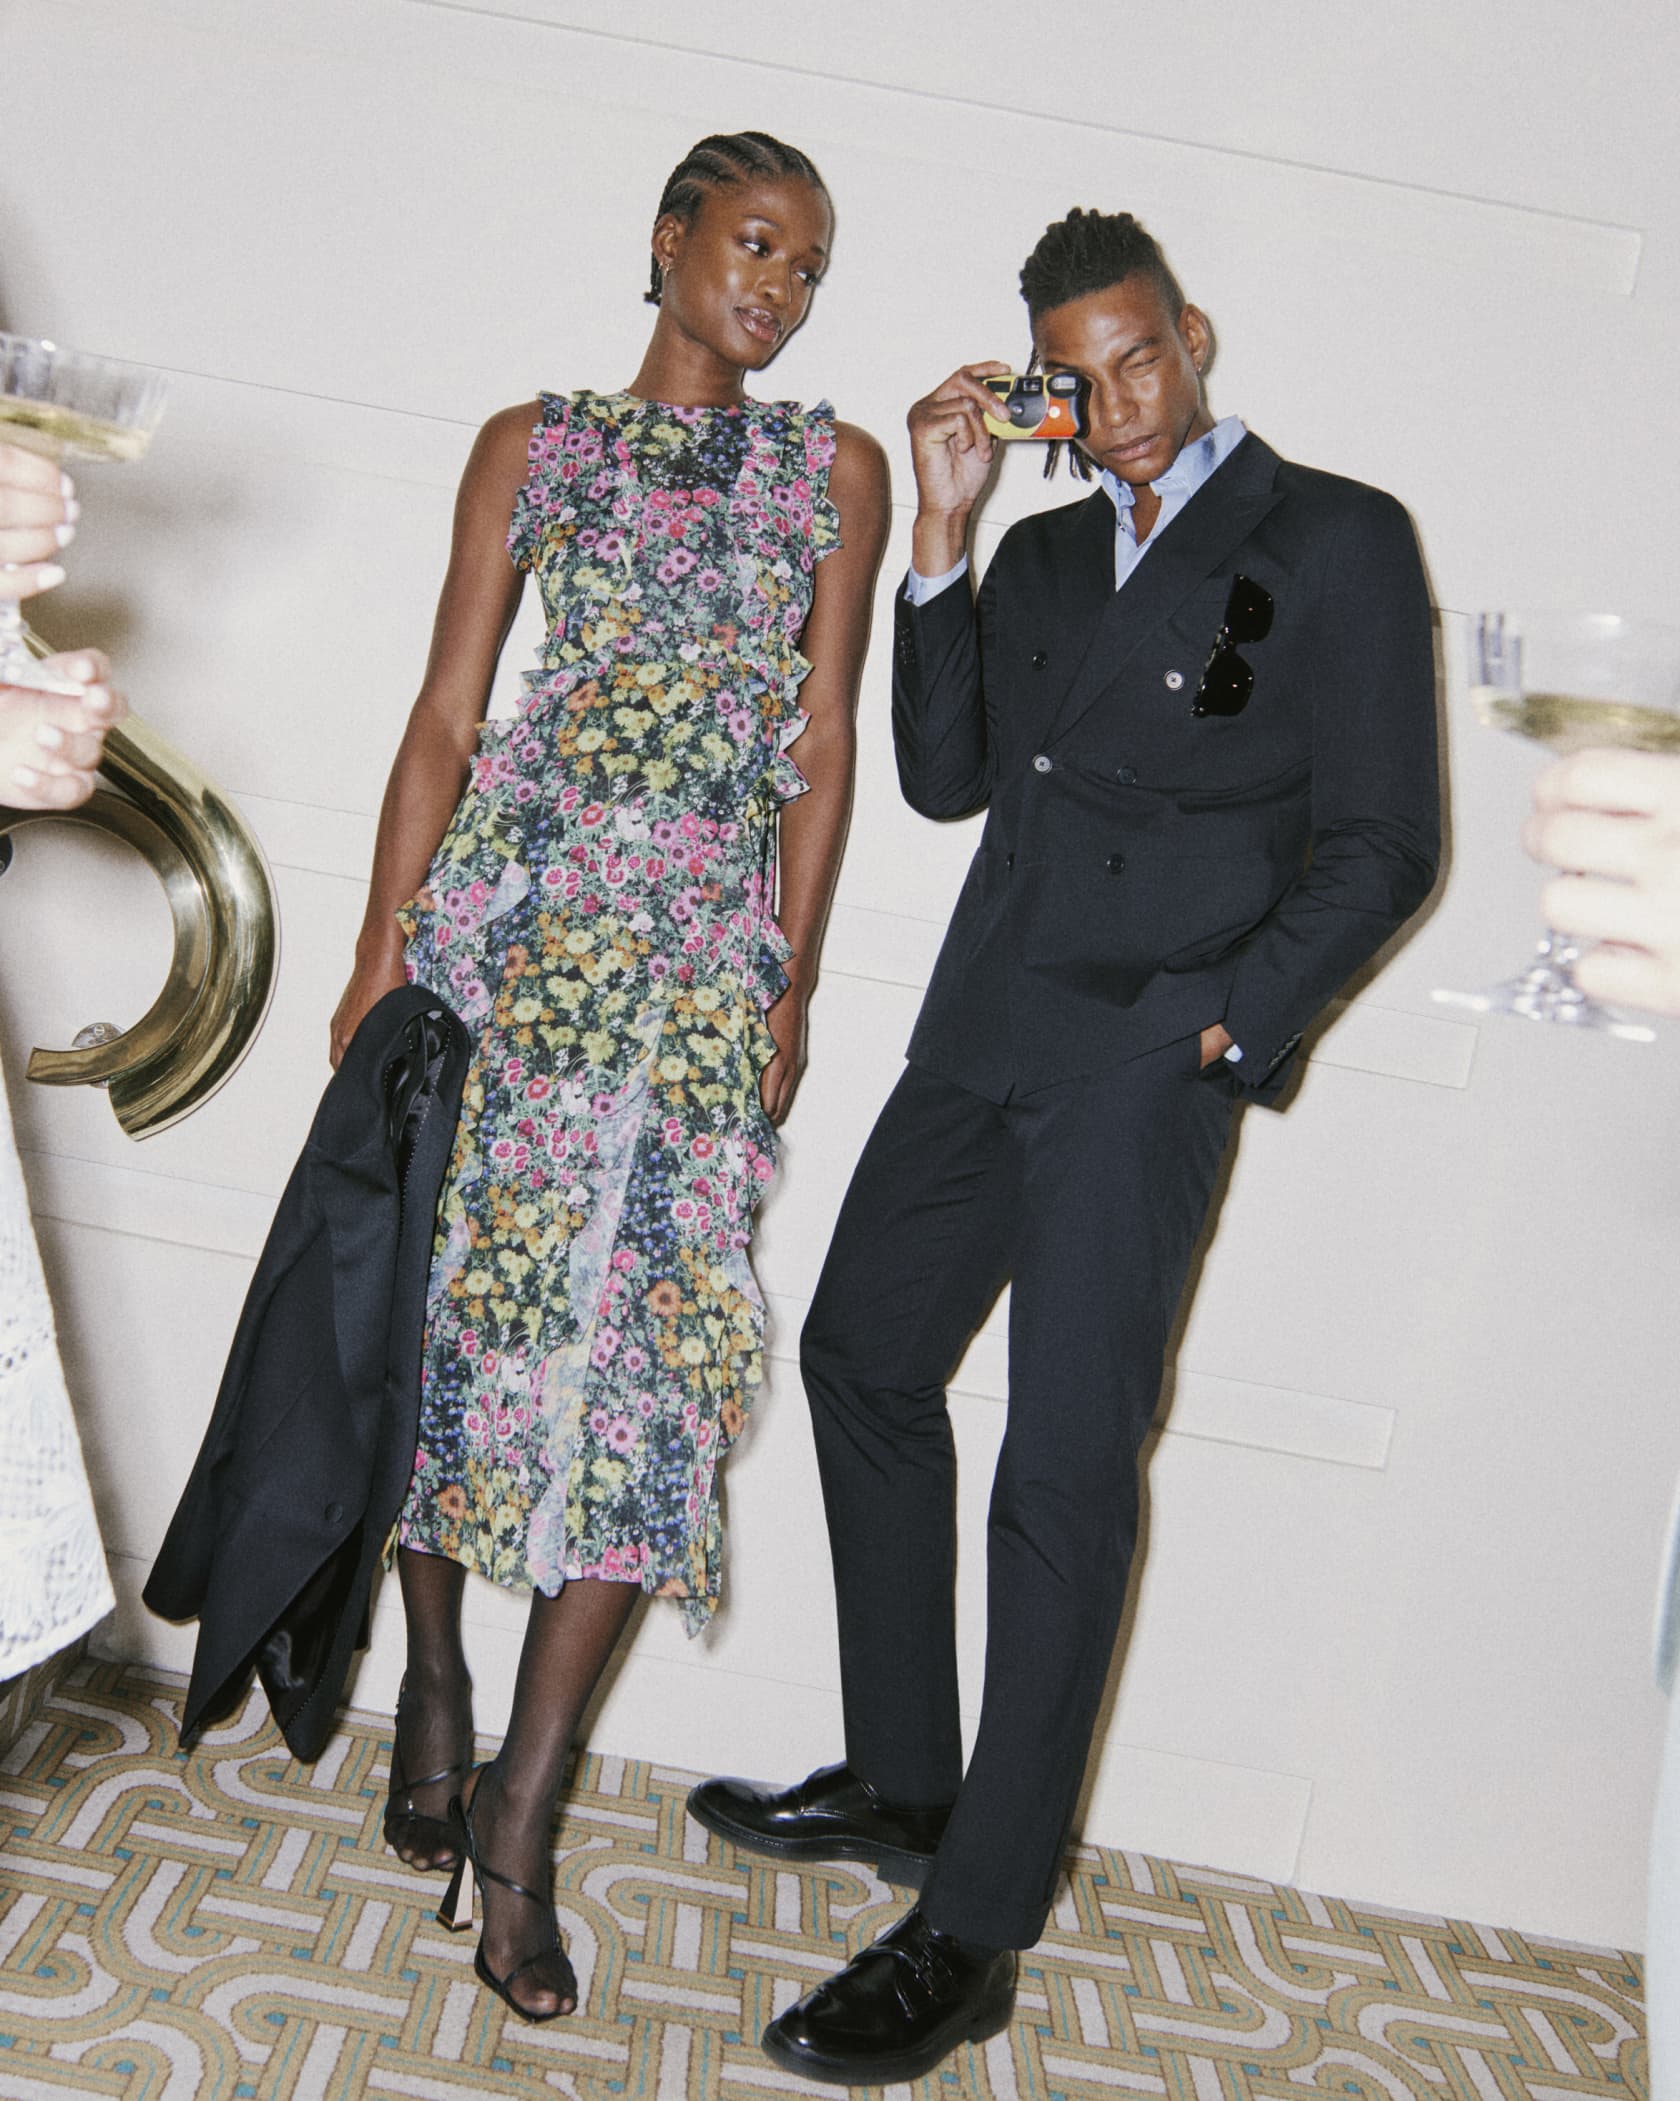 Man in a navy suit holding a disposable camera, woman on the left wearing a floral print dress holding a suit blazer jacket